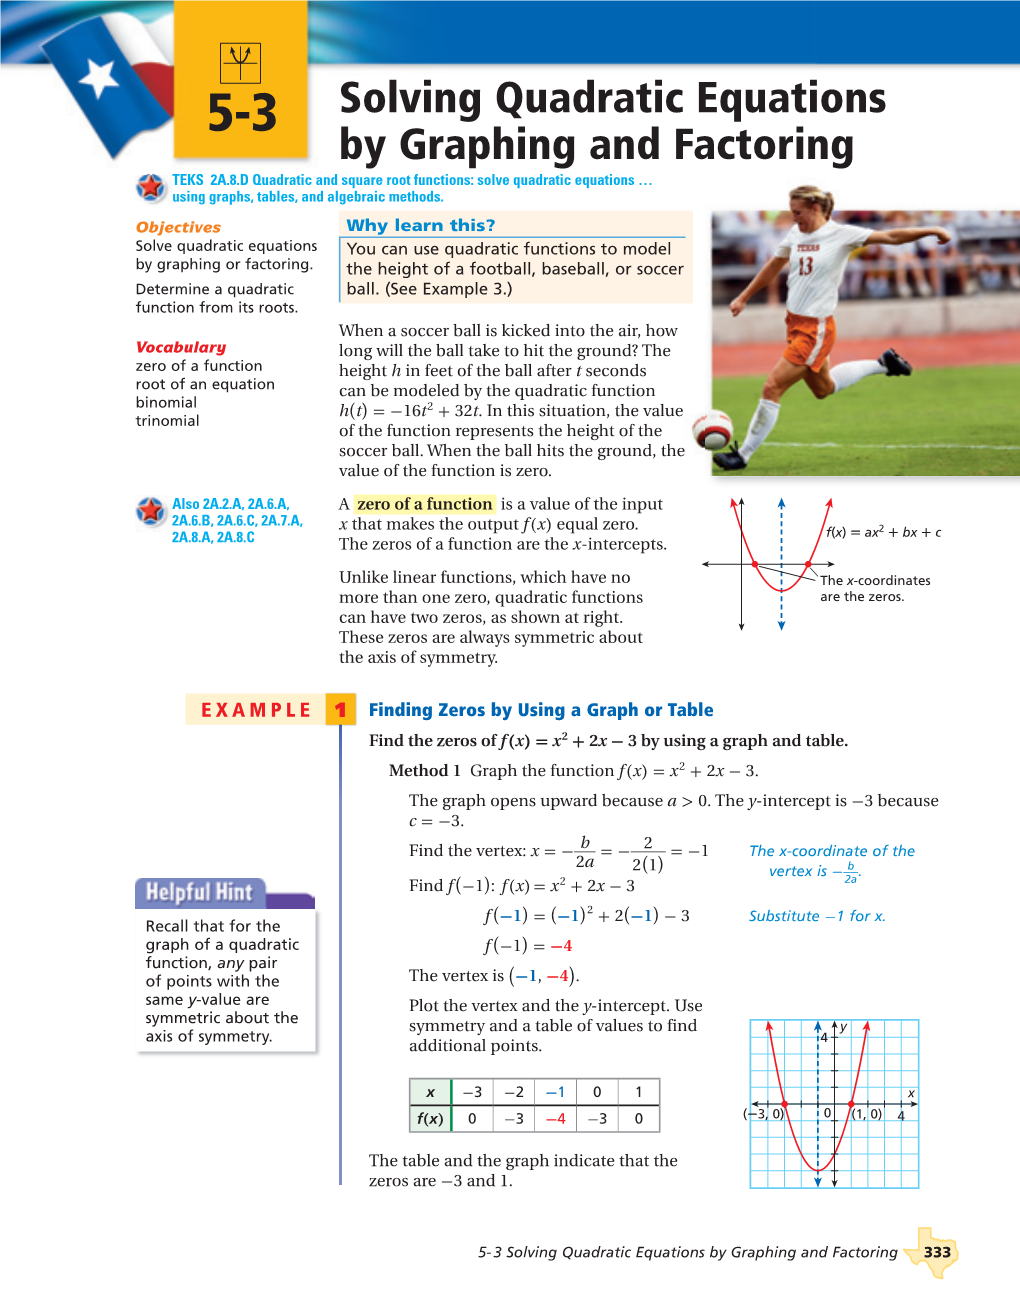 Solving Quadratic Equations by Graphing and Factoring